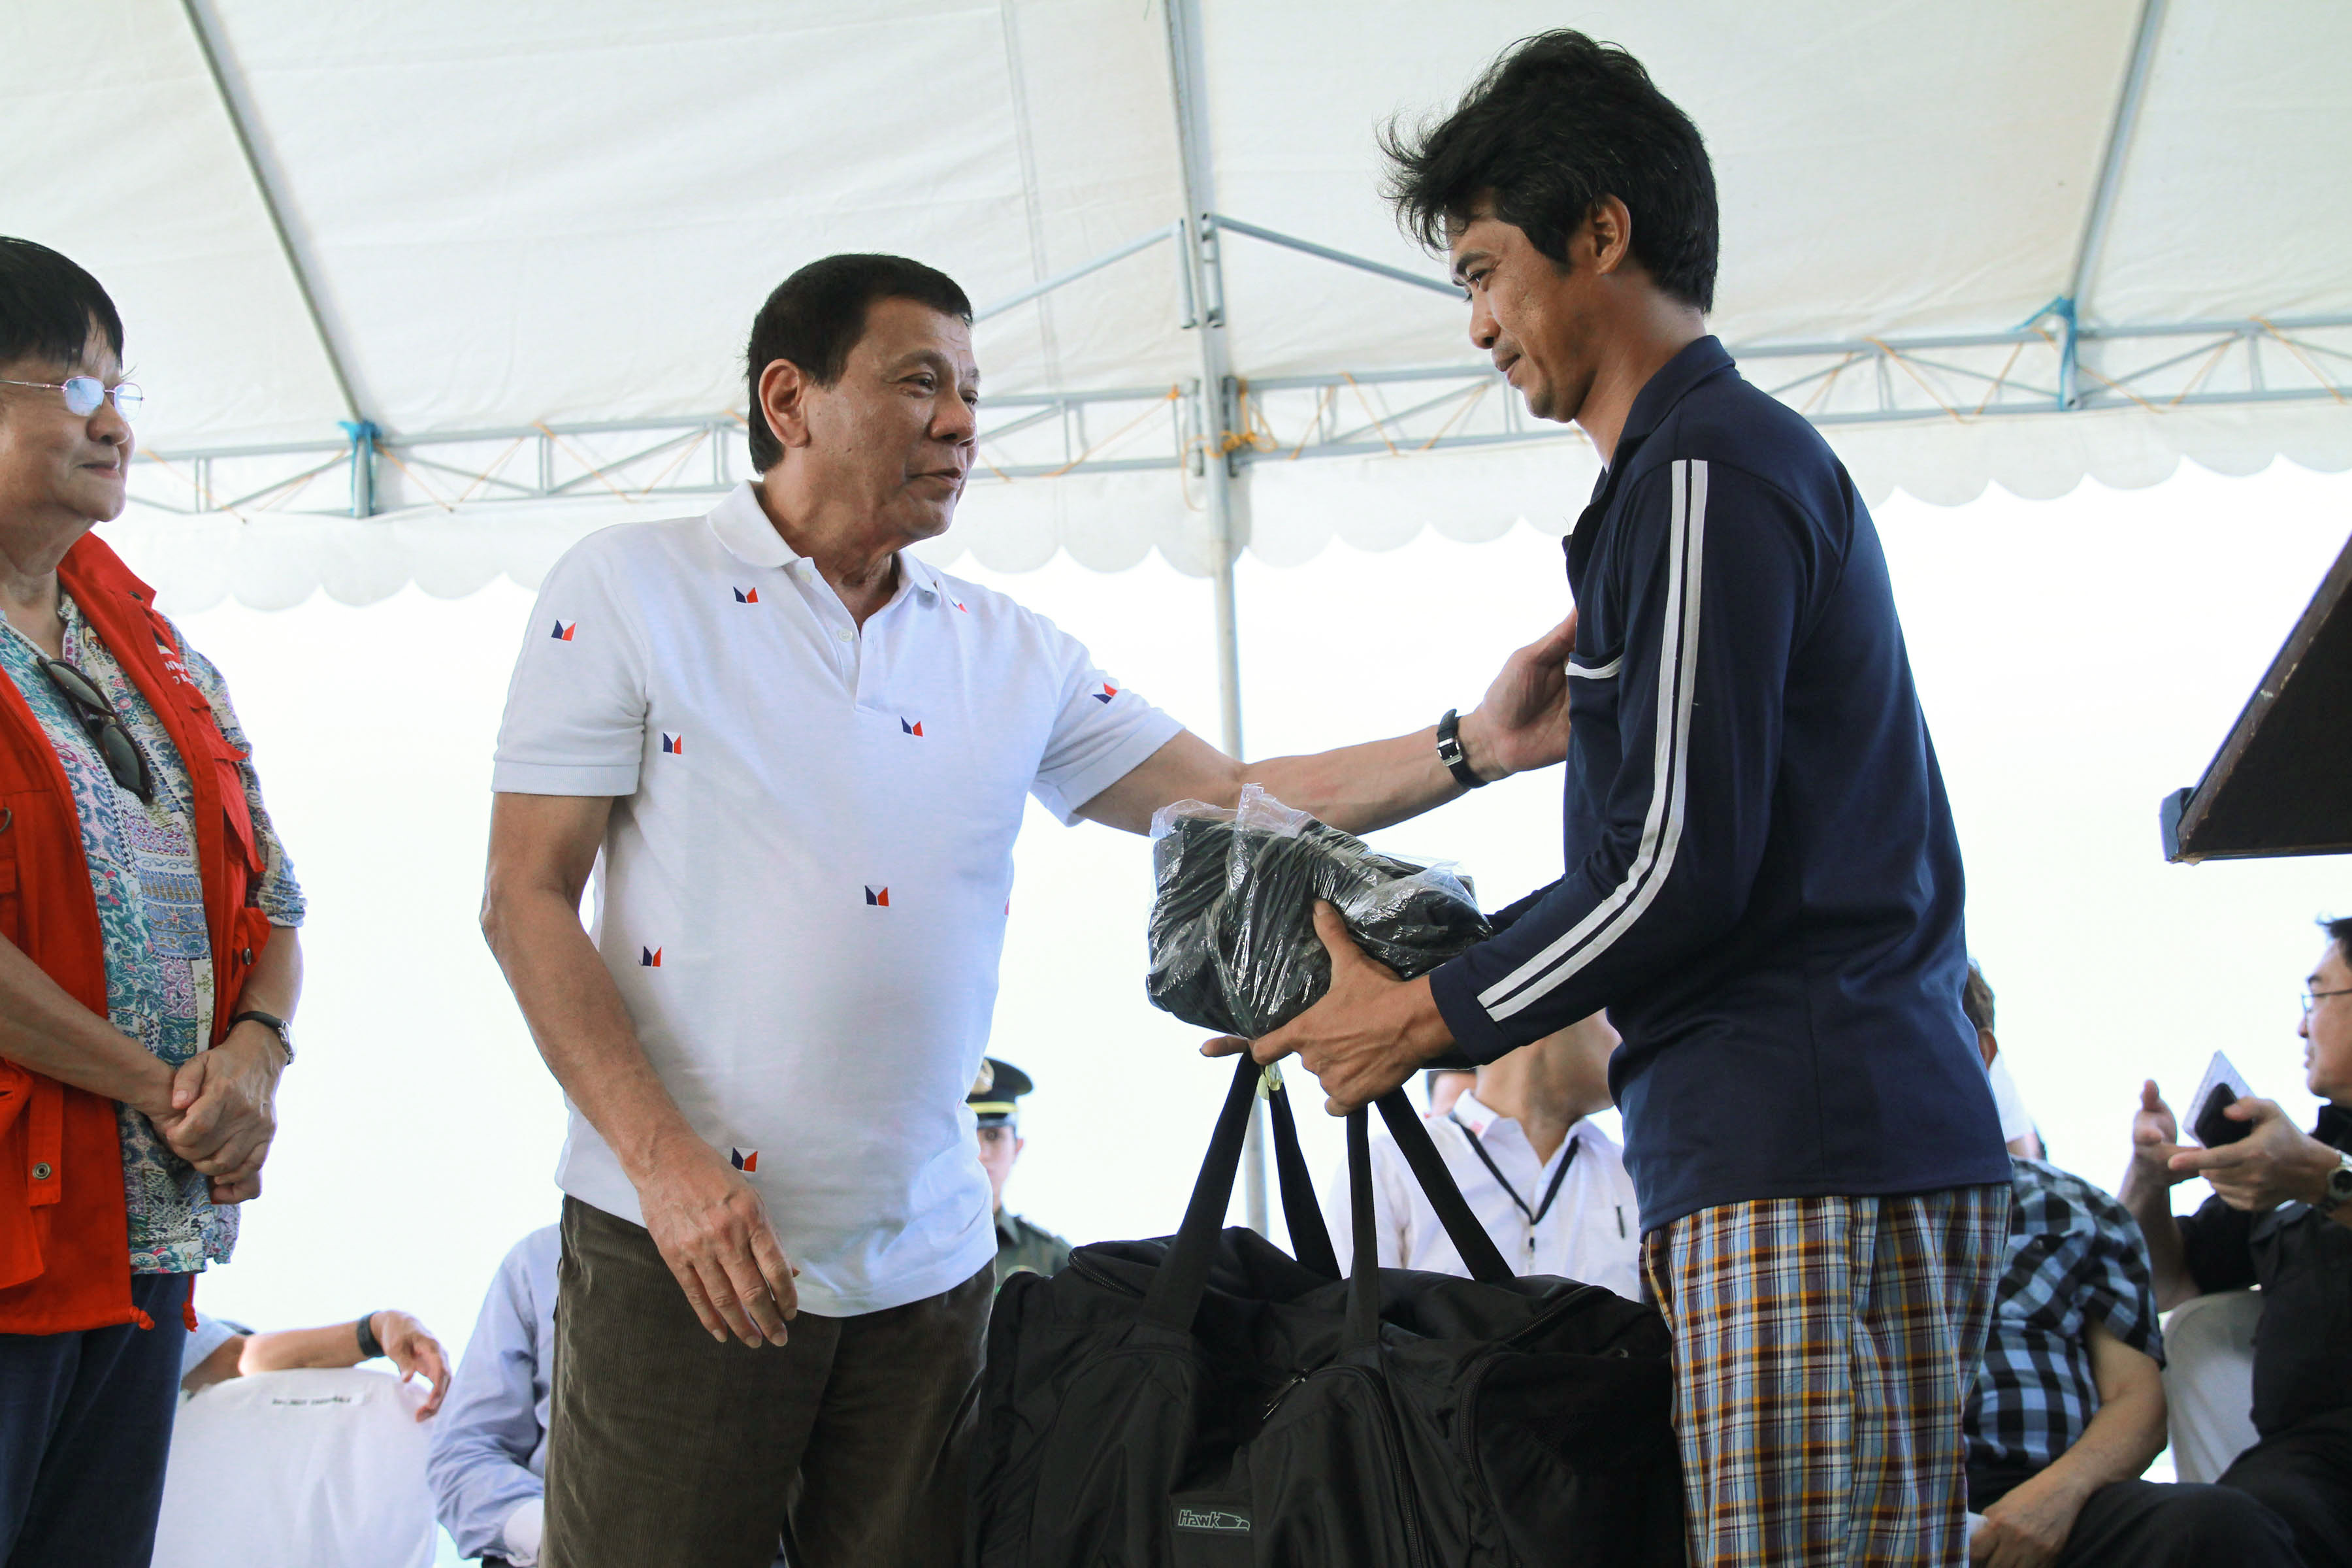 'ACT OF GOODWILL.' Philippine President Rodrigo Duterte hands tokens to Vietnamese fishermen in Pangasinan before they set off for their journey home, November 2, 2016. Photo by Alfred Frias/Presidential Photo 